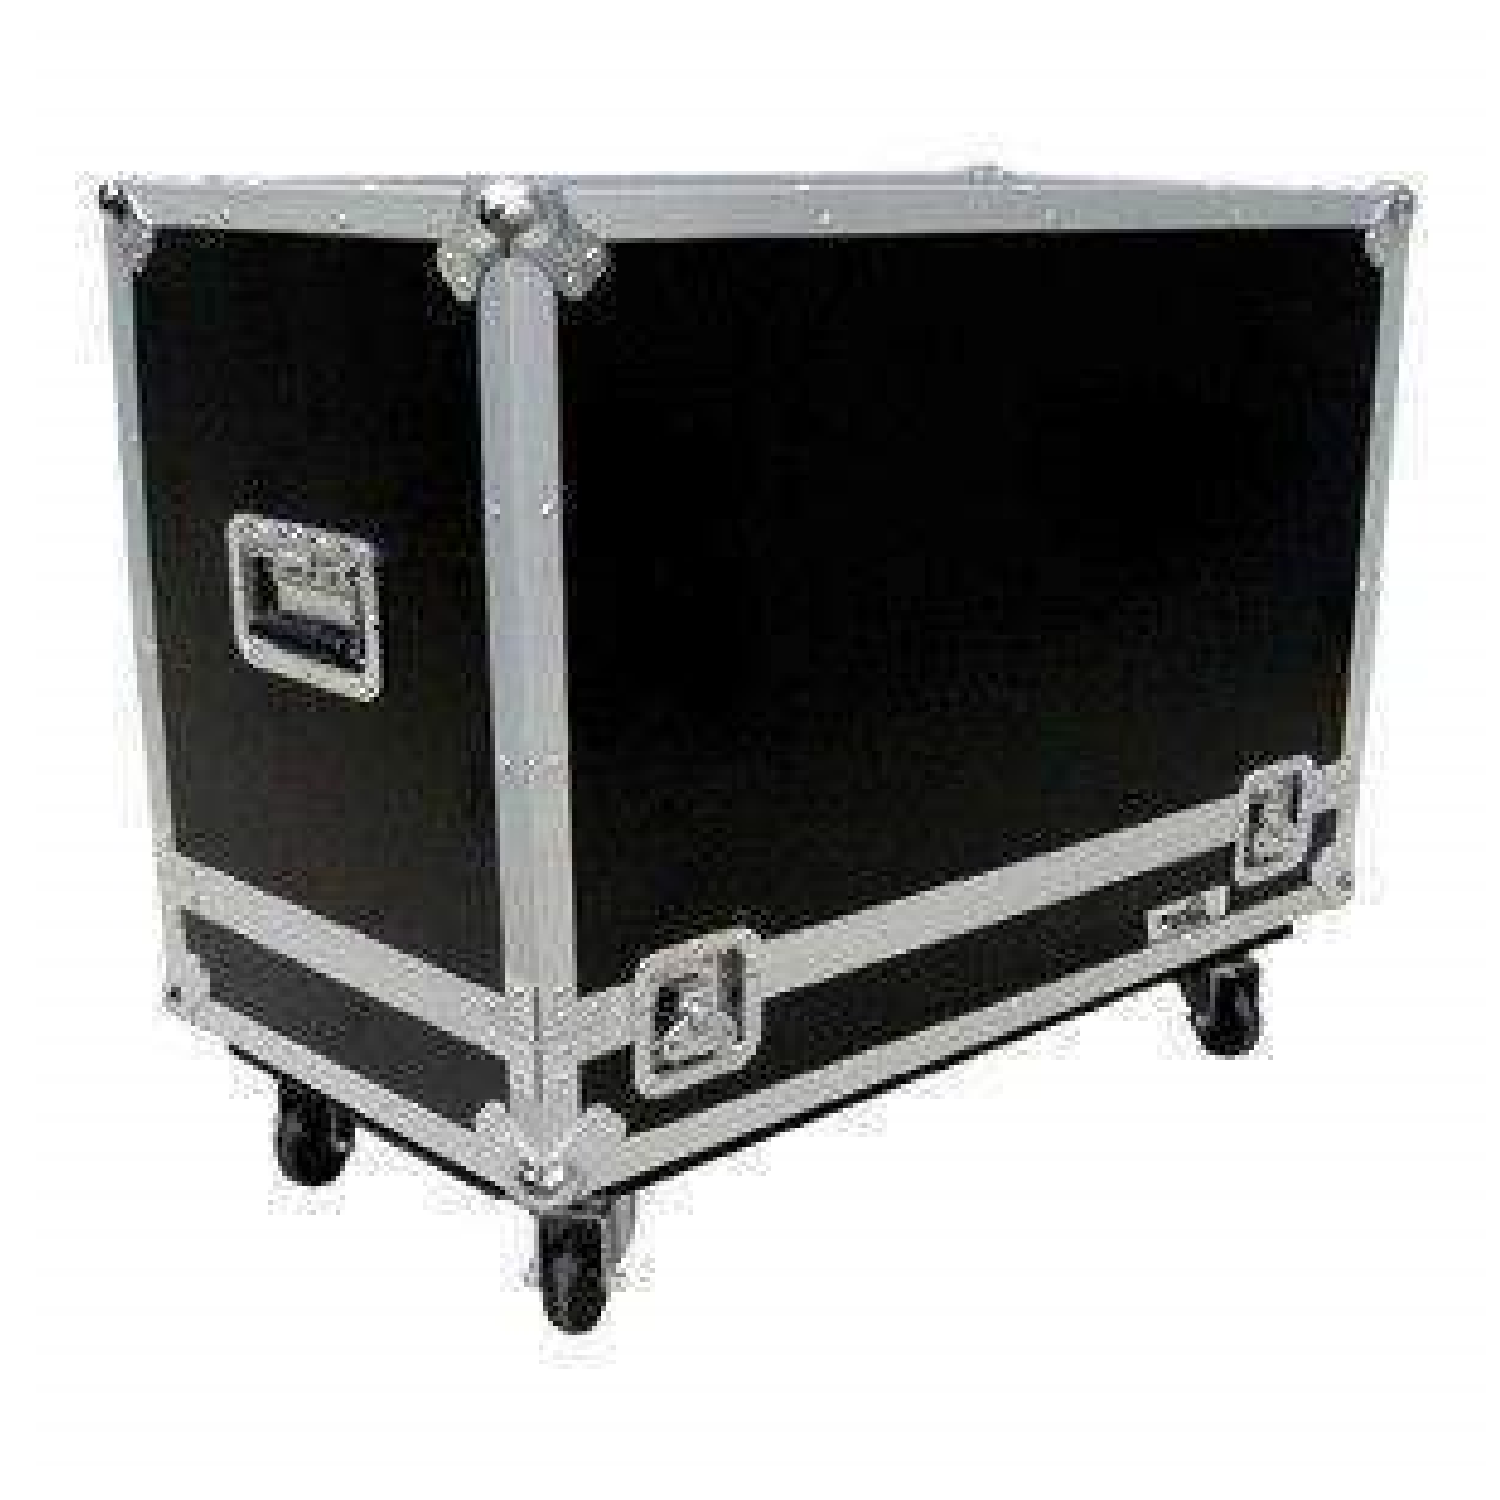 Guitar Case with 2 x 12 Inches Speakers Length Adjustable   RRGC212C road ready